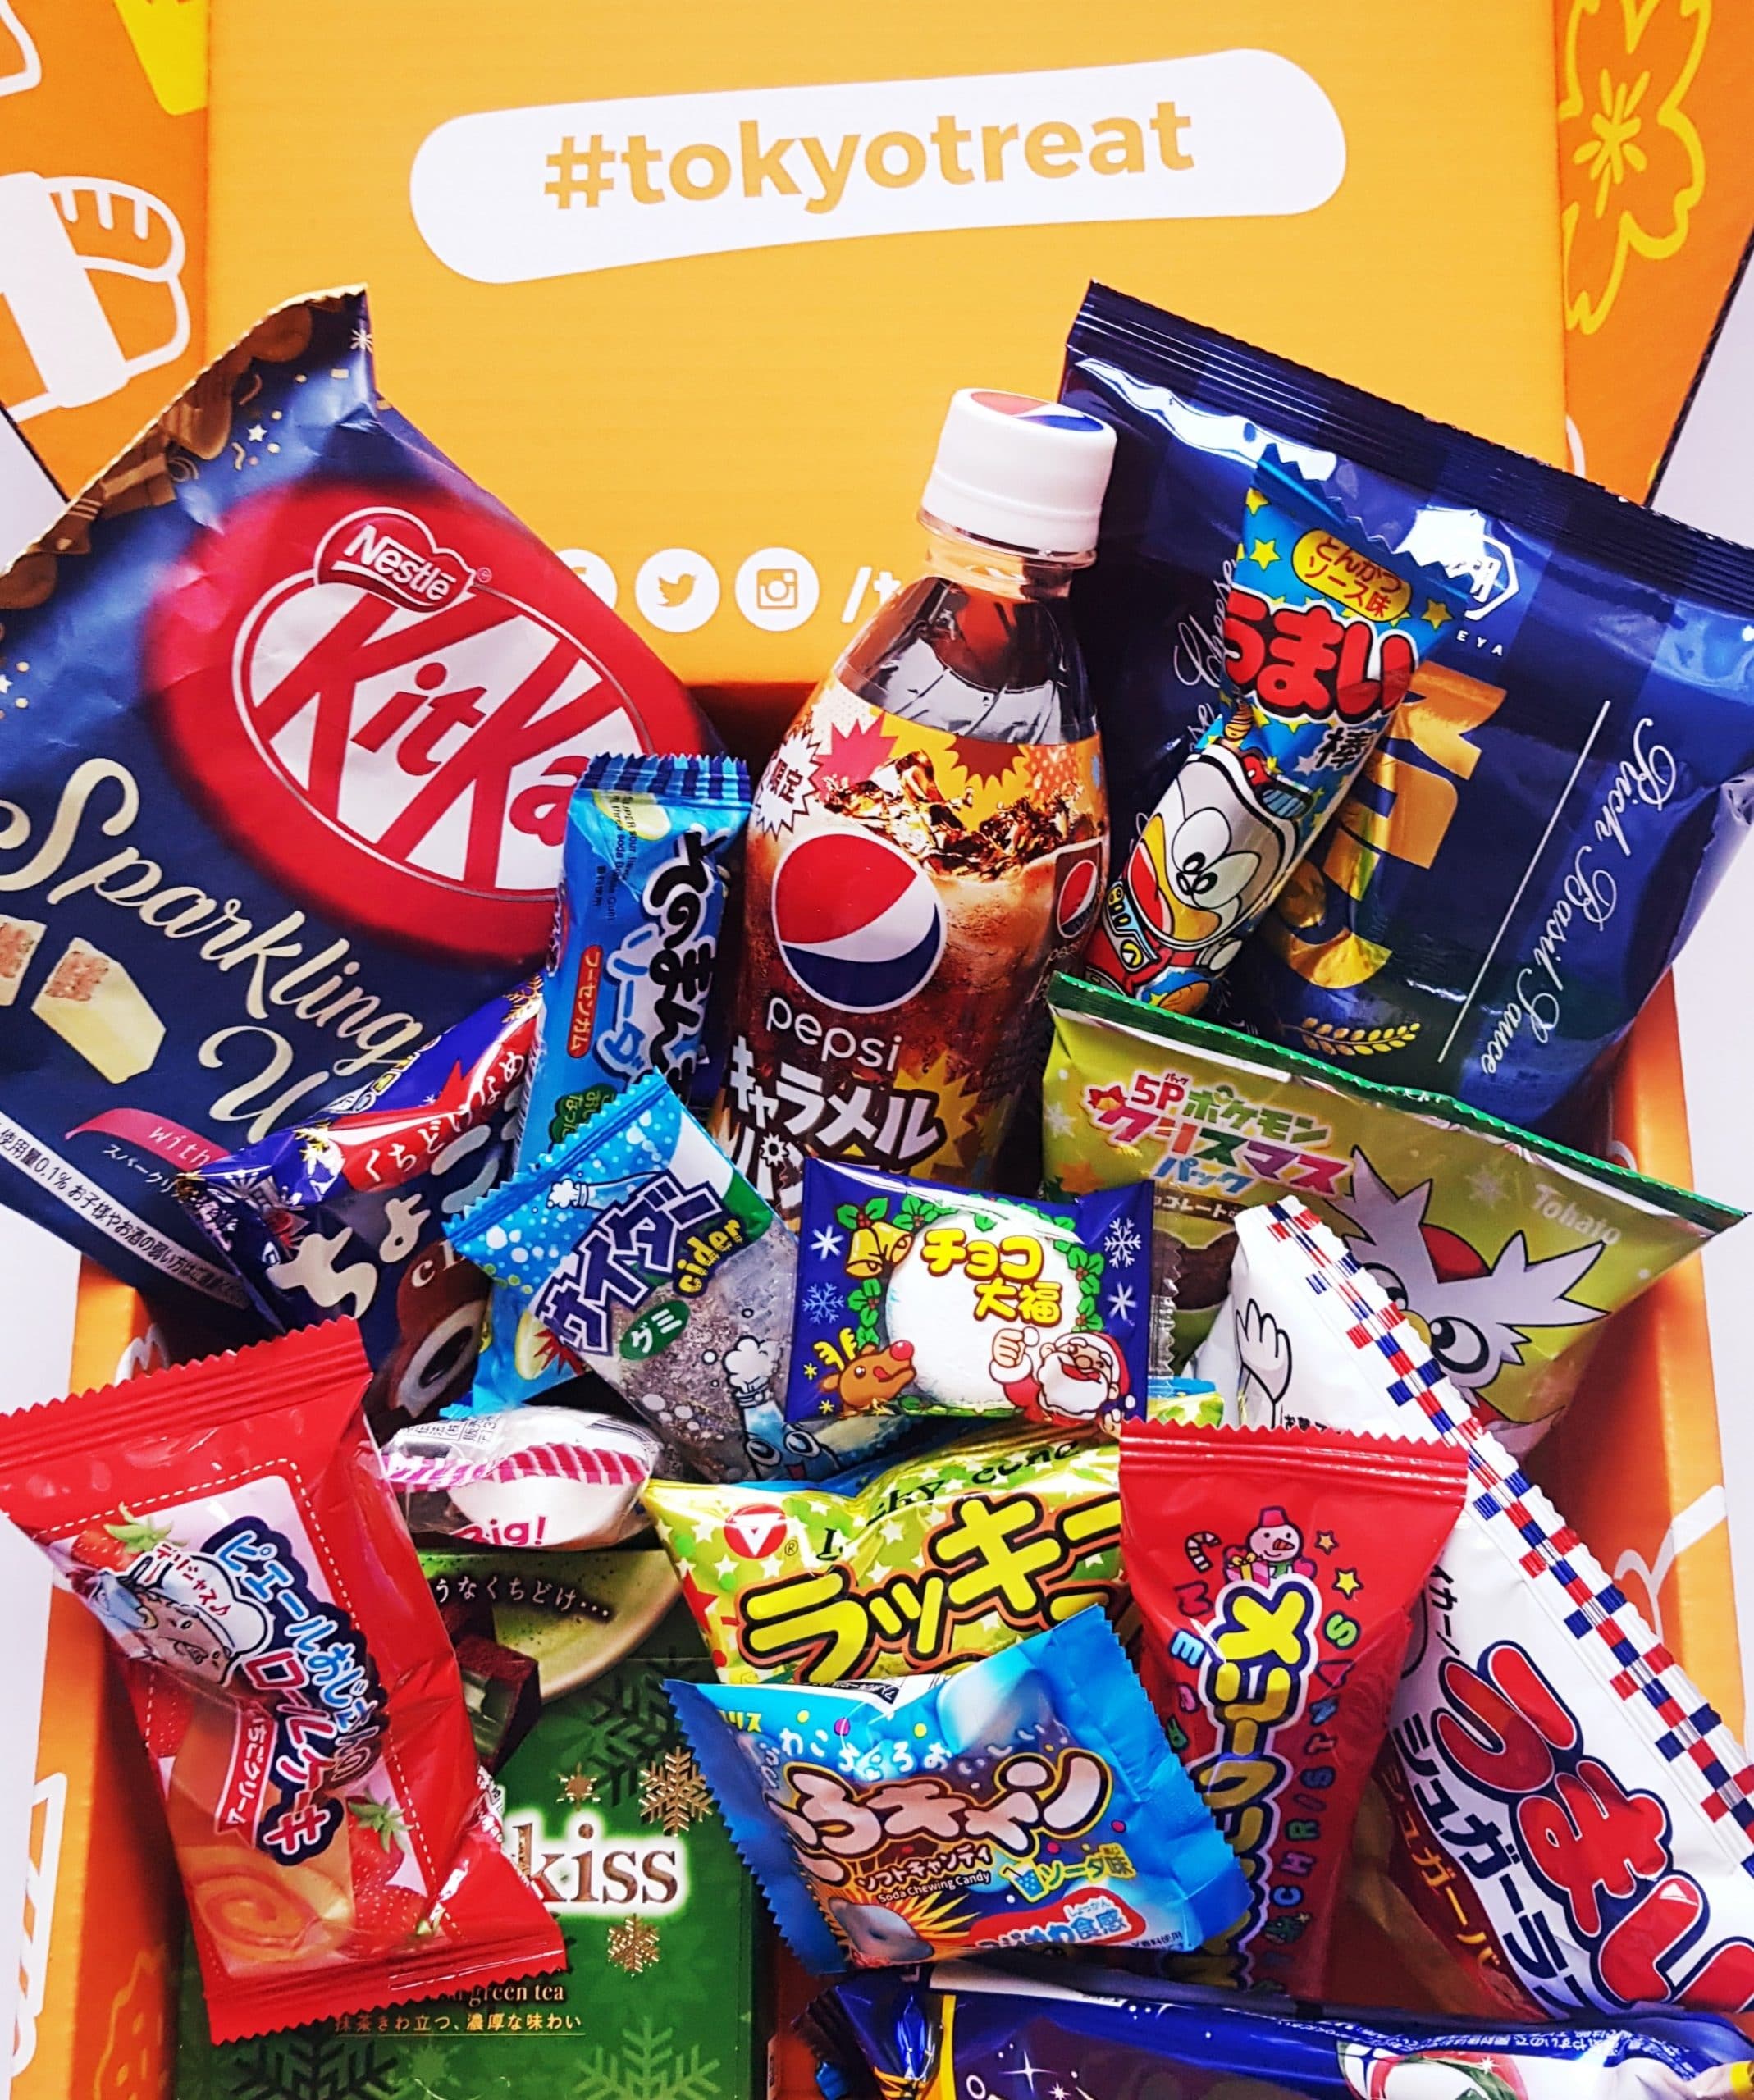 Tokyotreat December 2020 All Subscription Boxes Uk Get 15% off with 37 active tokyo treat discount codes & vouchers at hotdeals. tokyotreat december 2020 all